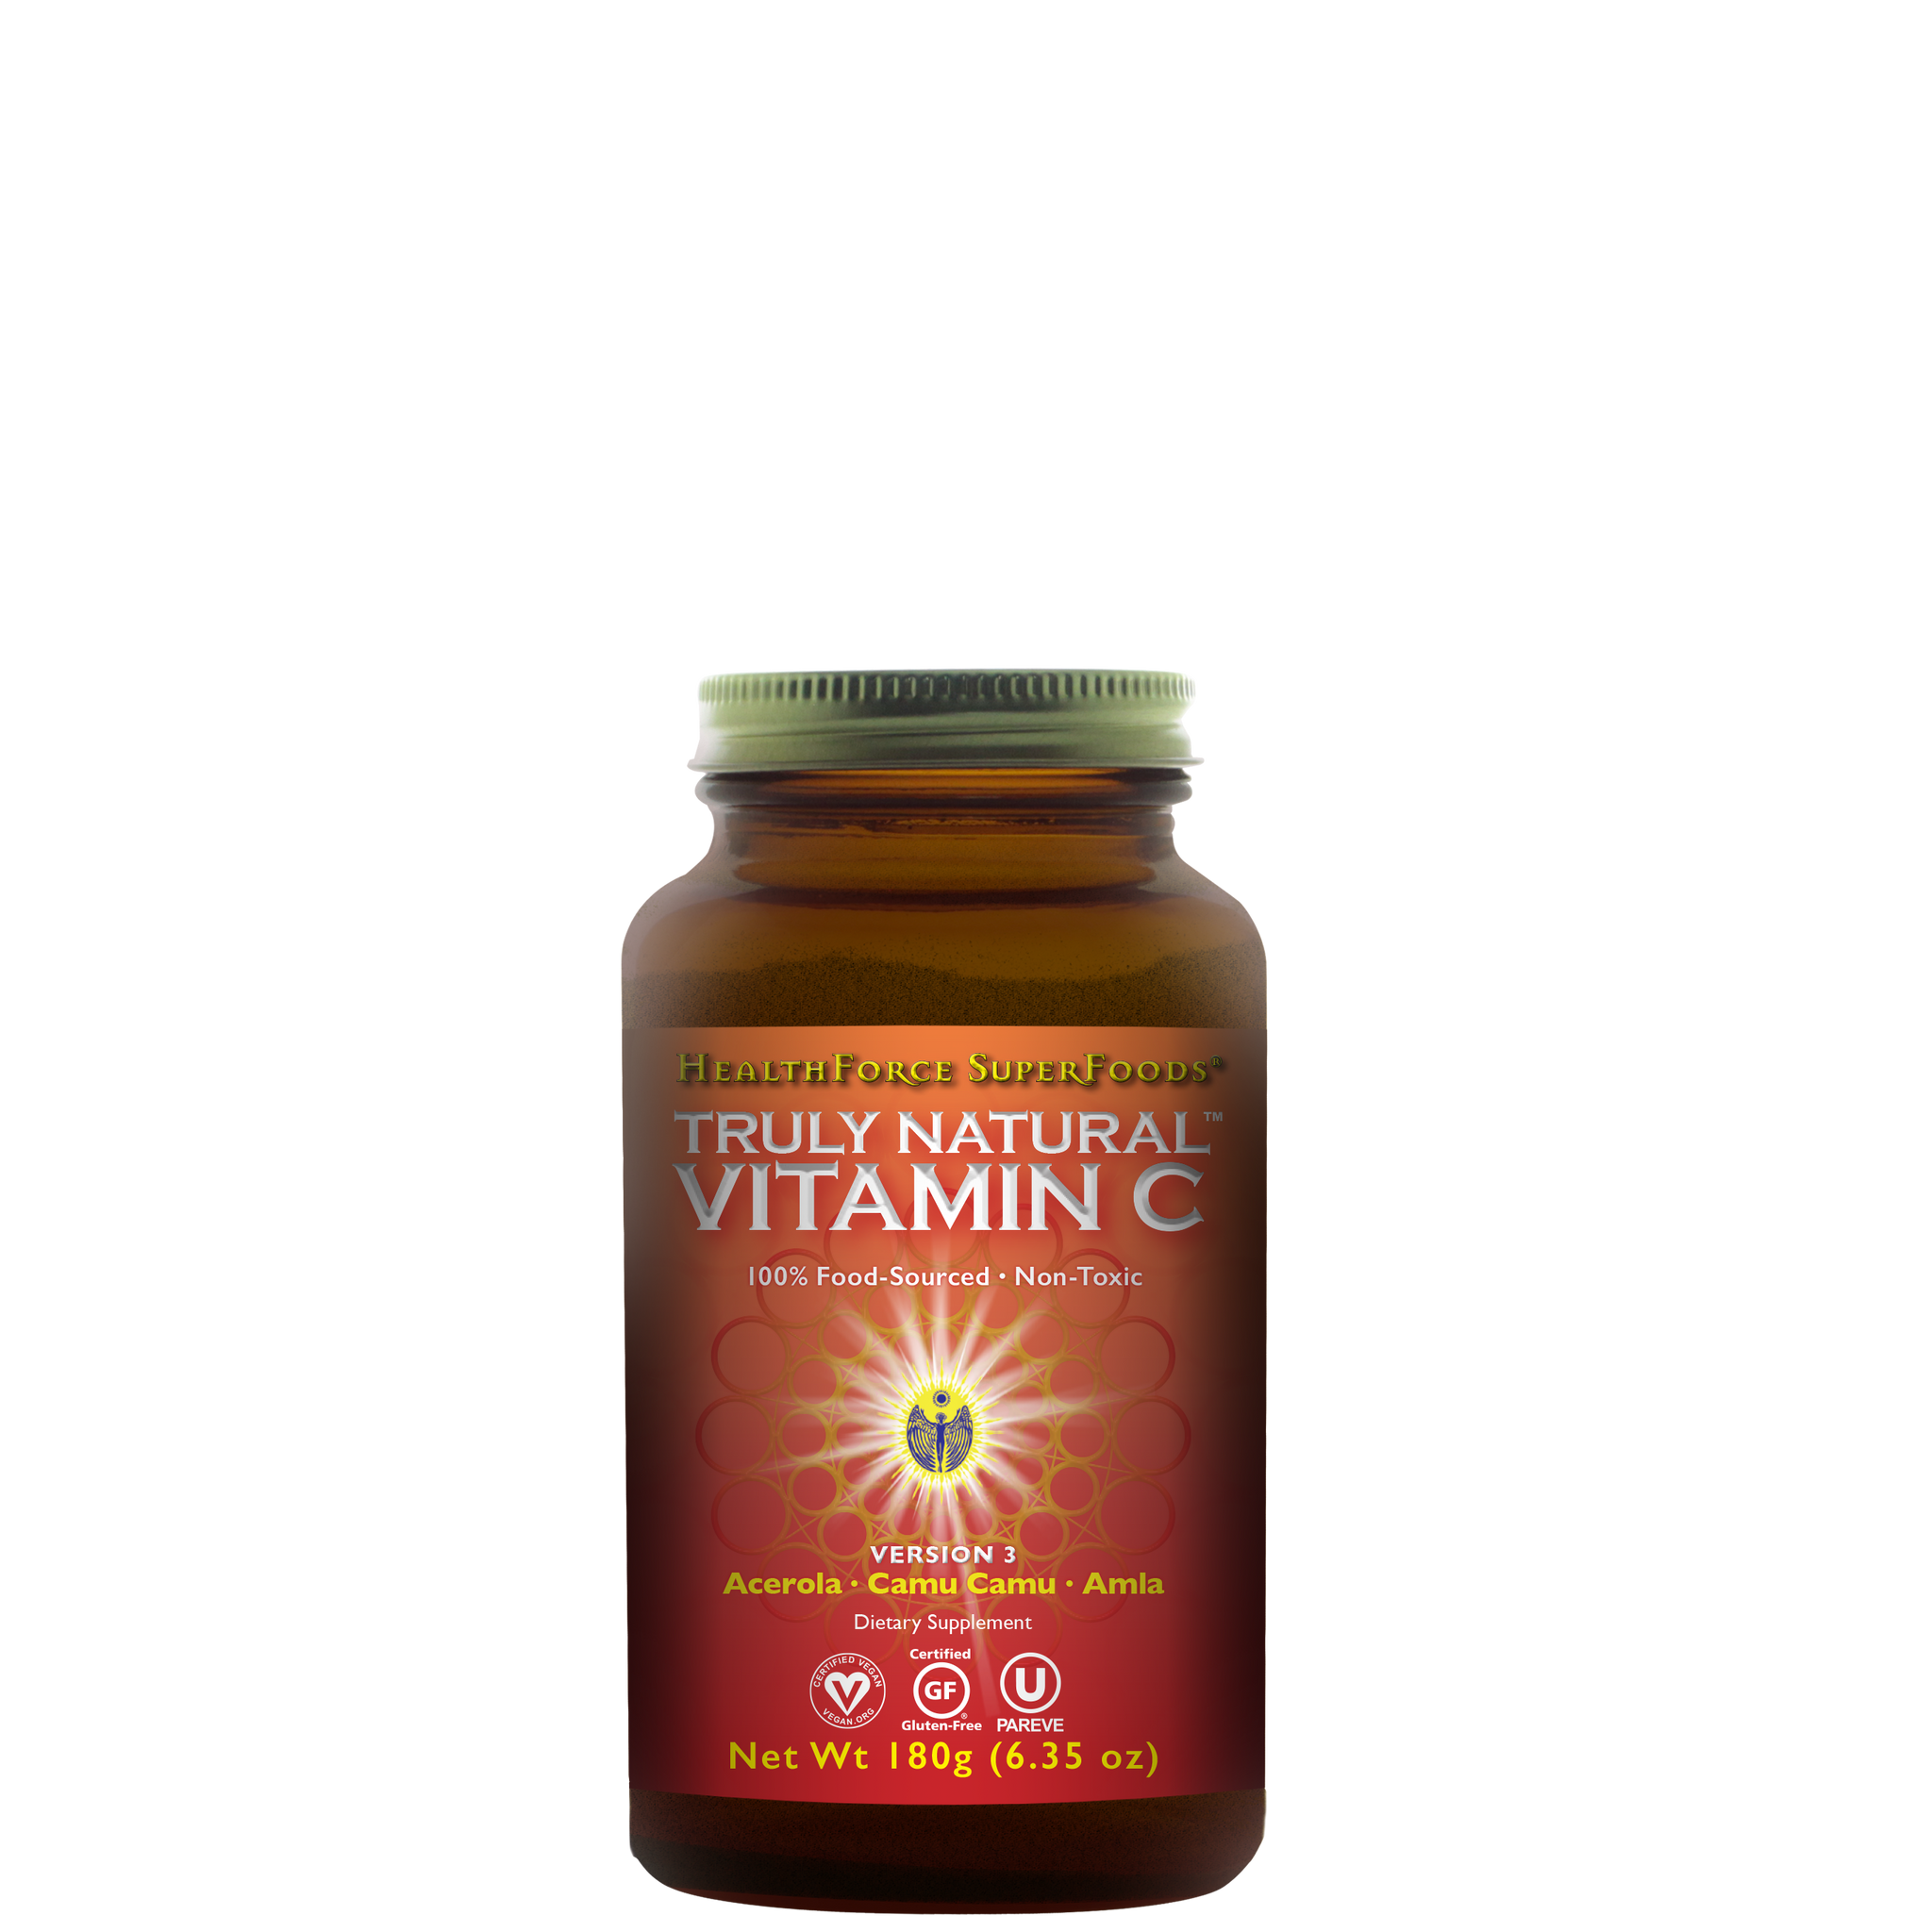 Truly Natural Vitamin C (with Cama Camu Berry, Whole Amla Berry and Acerola Cherry Extract) 180g